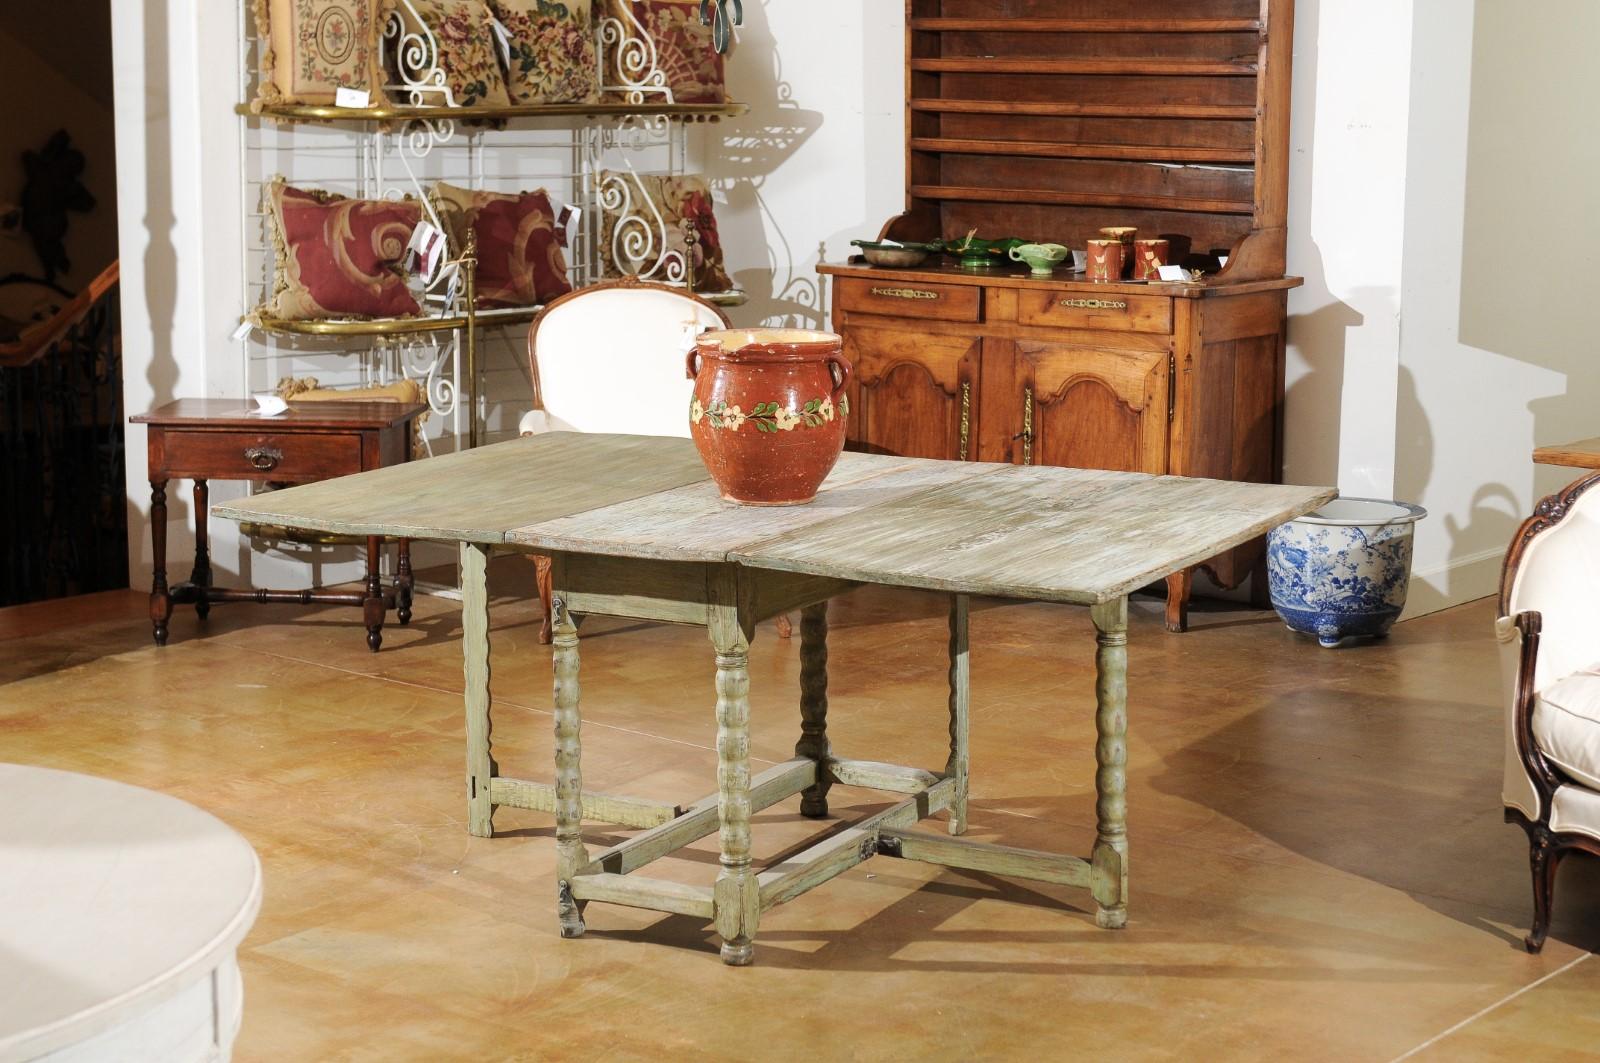 A Swedish painted wood gateleg drop-leaf table from the 18th century, with bobbin legs, side stretchers, lateral drawer and distress finish. Born in Sweden during the 18th century, this charming painted gateleg table features a rectangular top whose